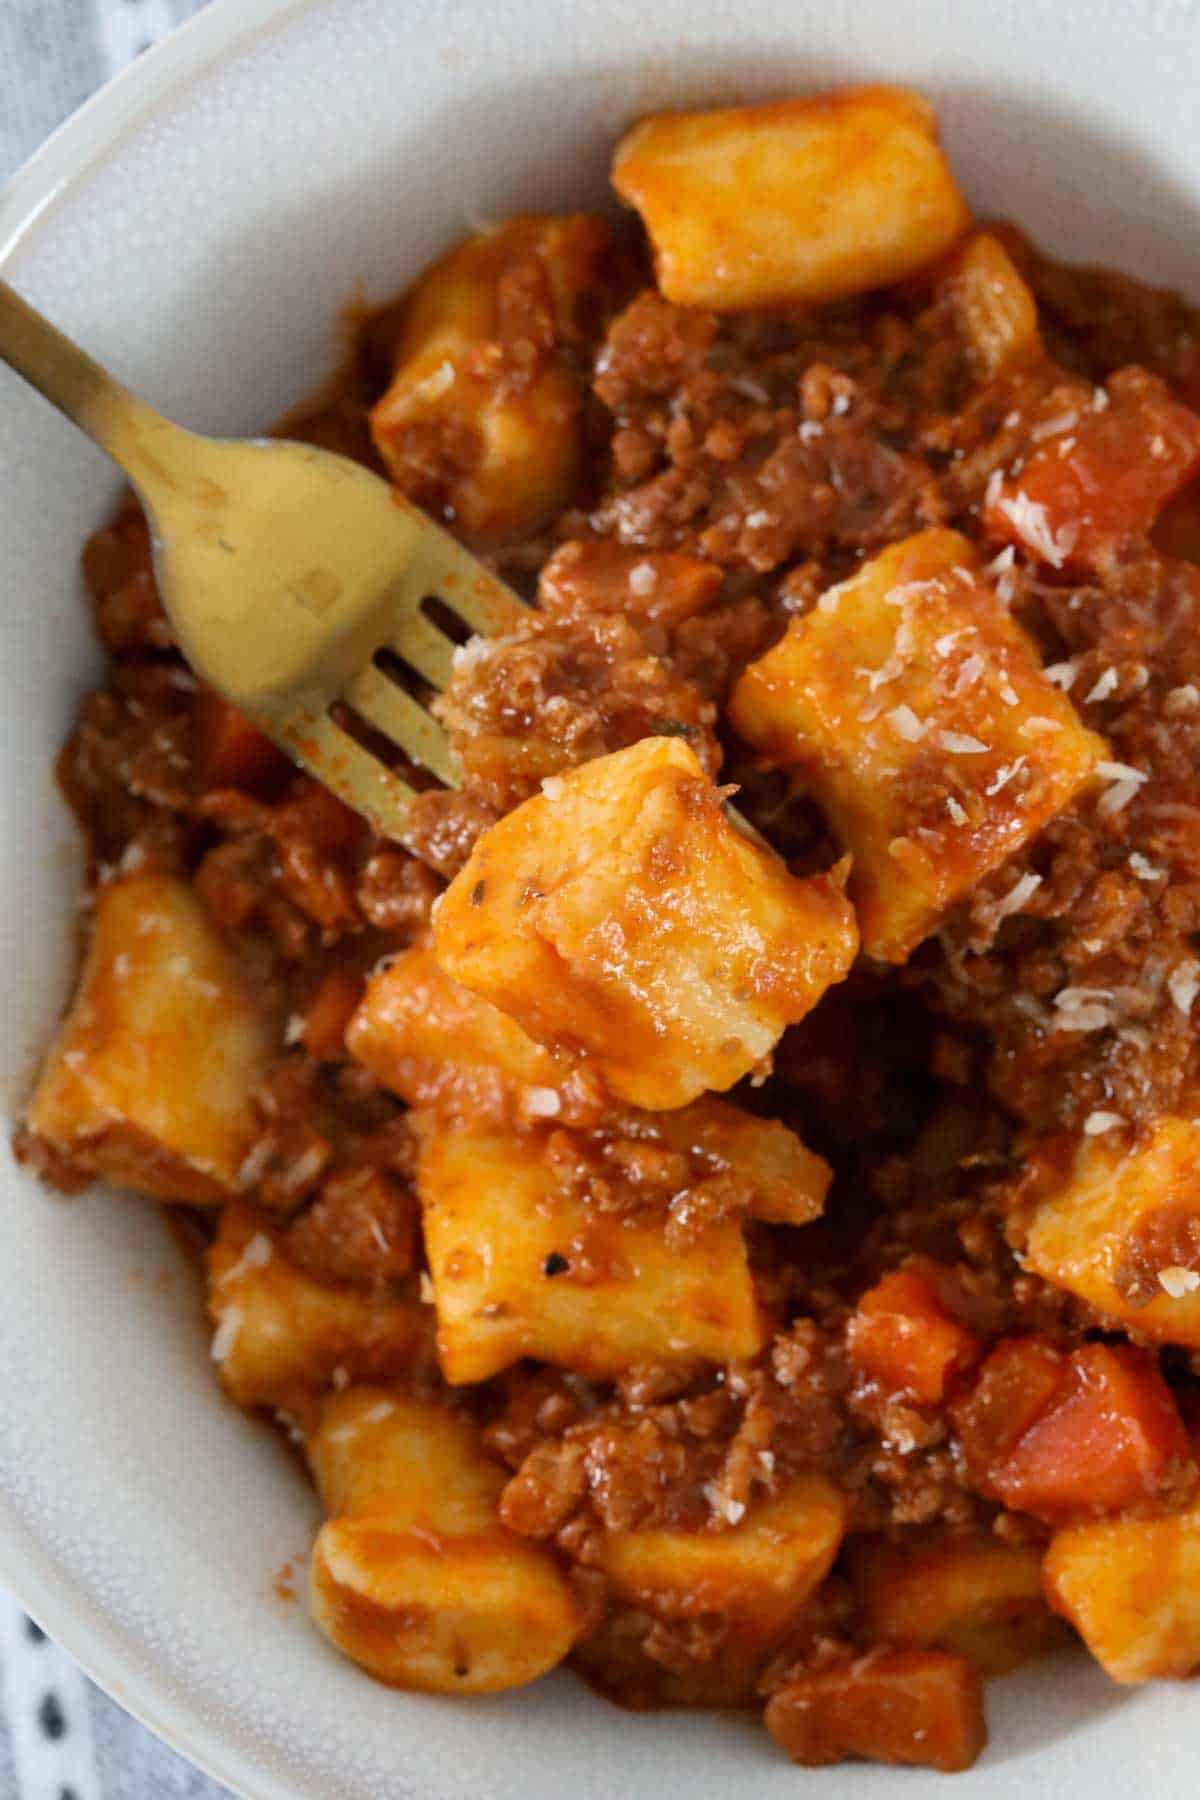 Gnocchi served with bolognese being eaten with a fork.